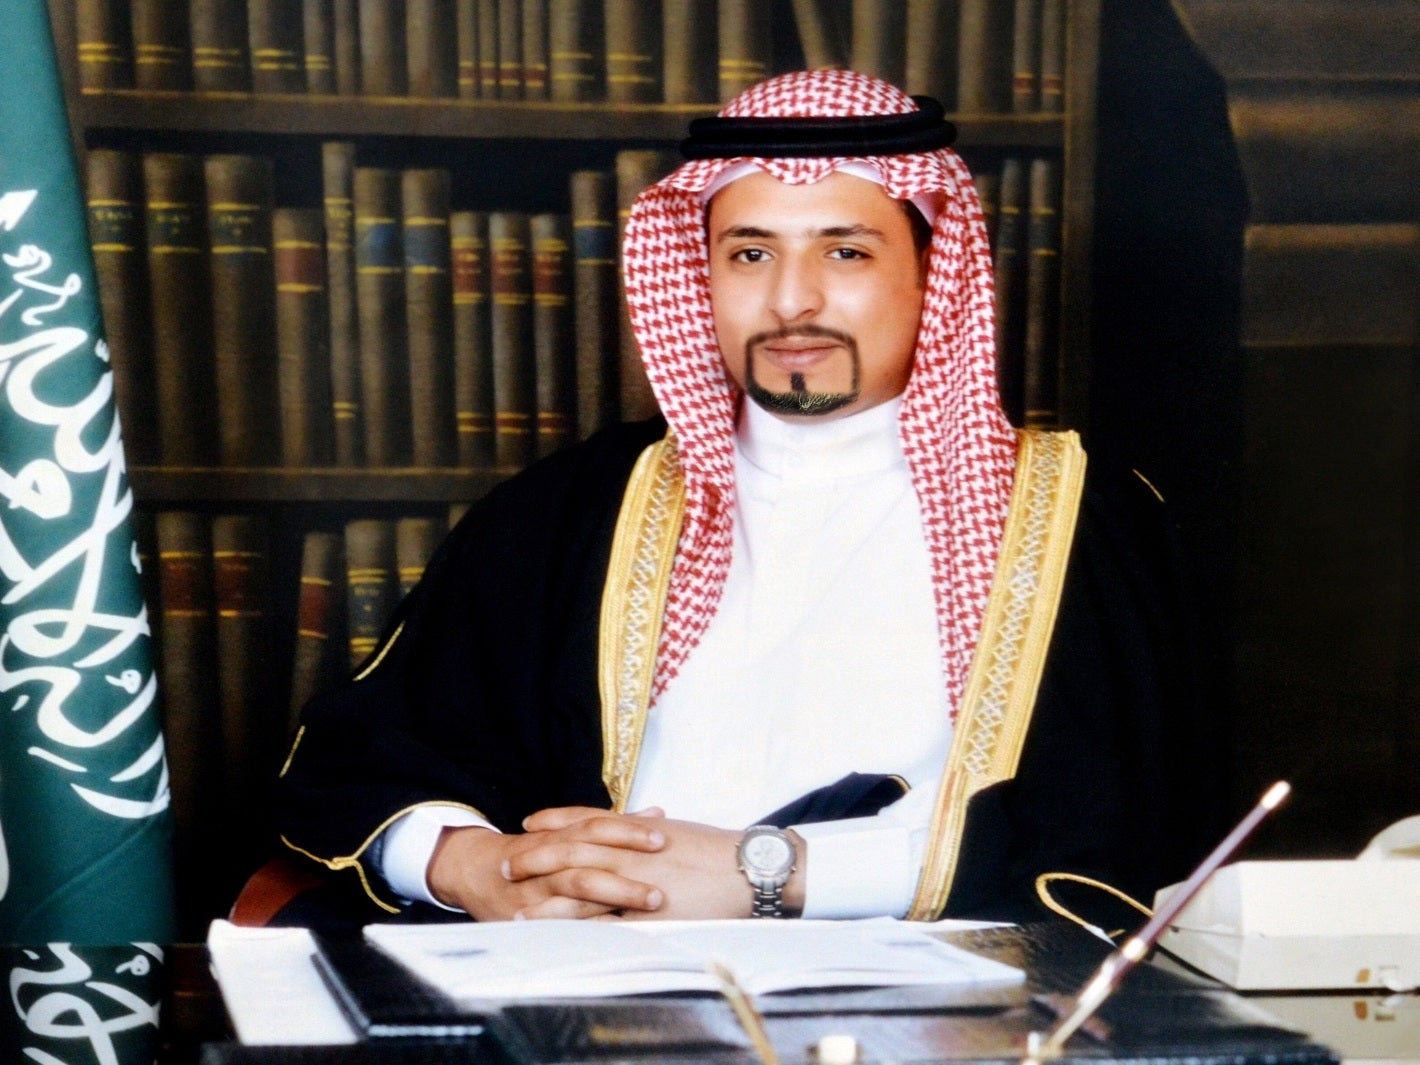 Khaled Farahan al-Saud, a Saudi prince, (pictured here) sets up an opposition movement calling for regime change in Saudi Arabia